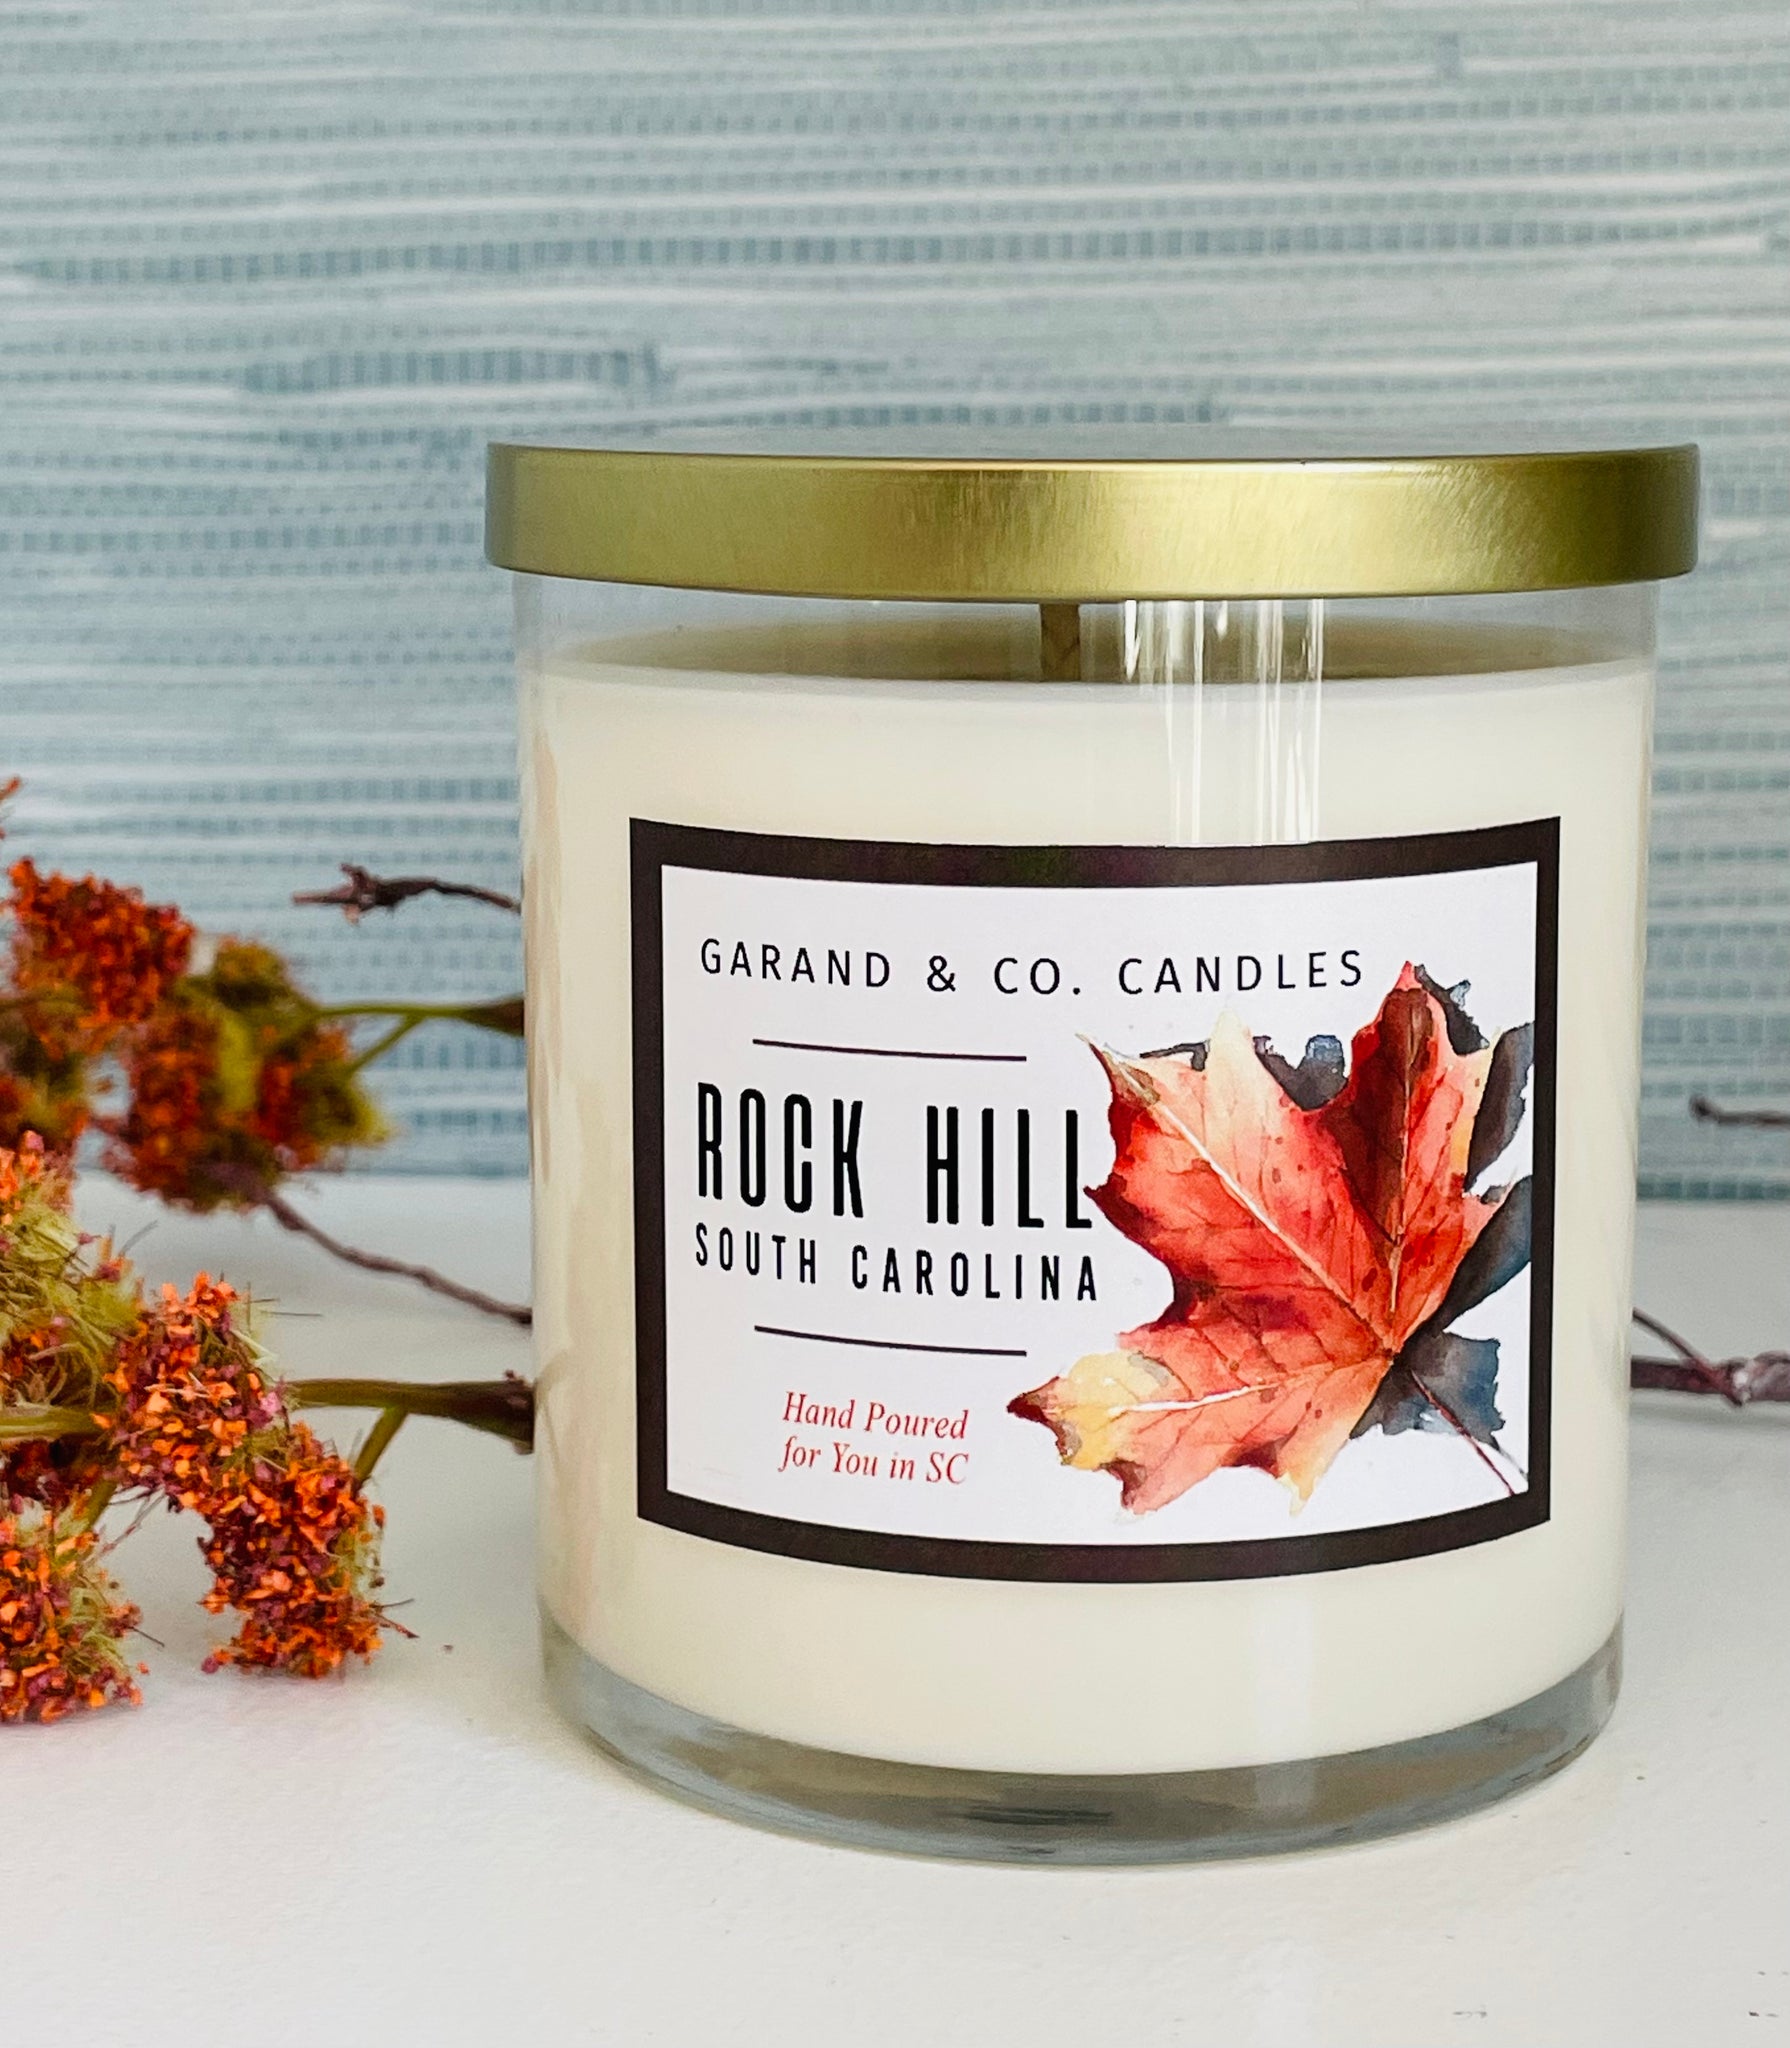 12 oz Clear Glass Jar Candle -  Rock Hill, SC Fall Leaves